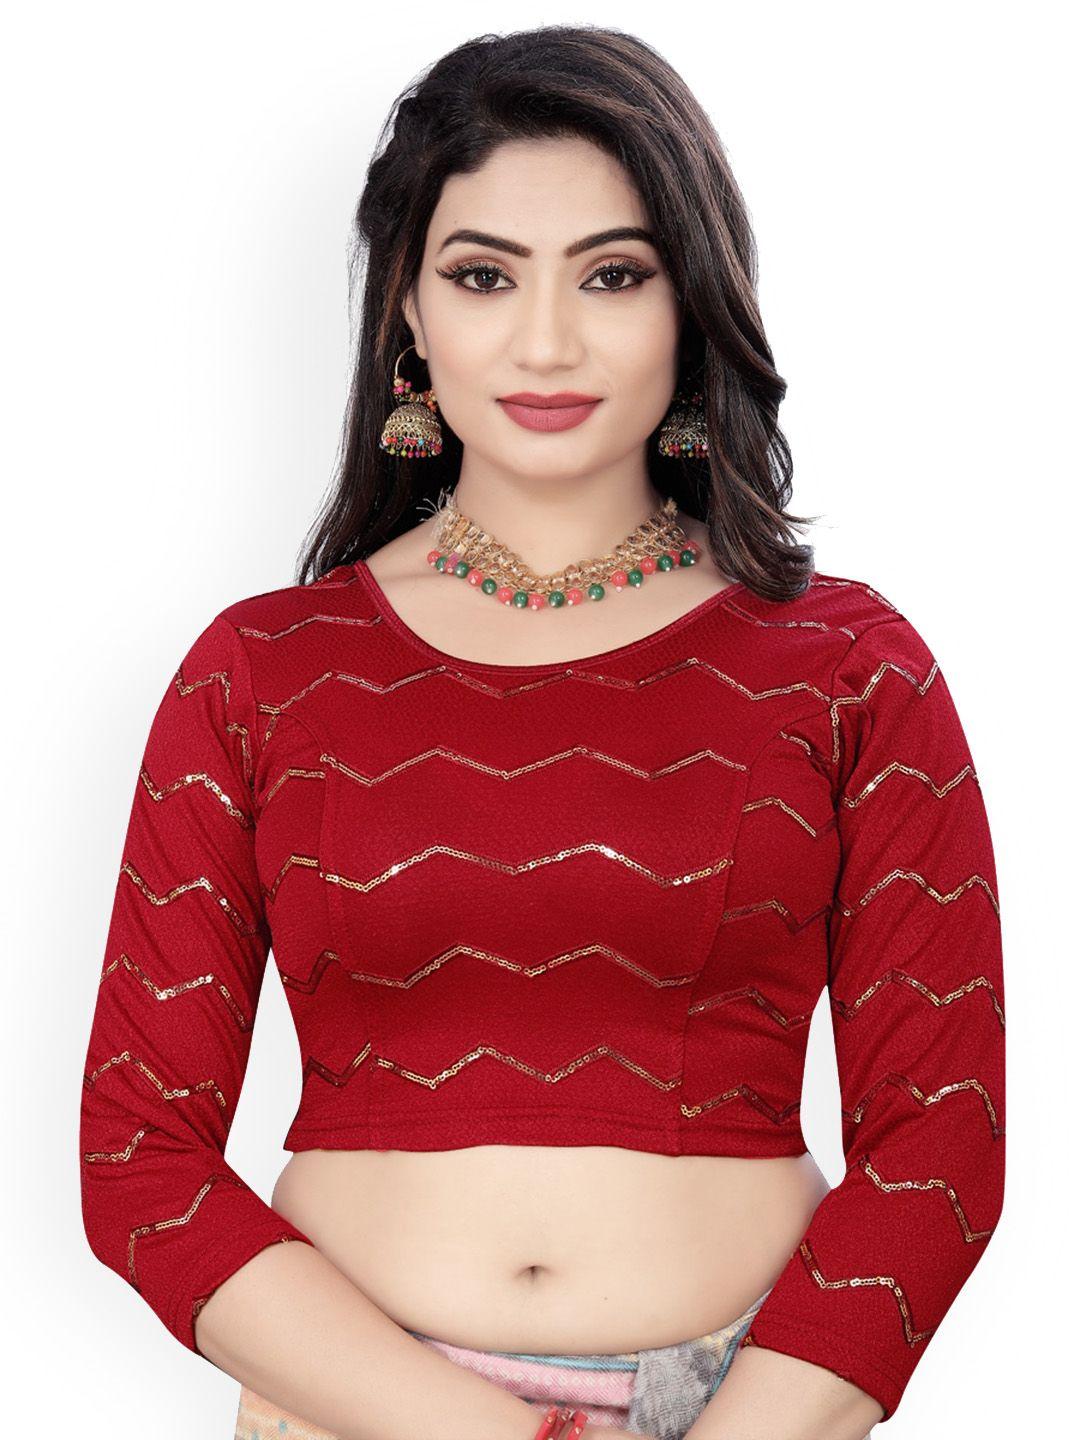 himrise embriodered round neck three-quarter sleeves sequinned saree blouse